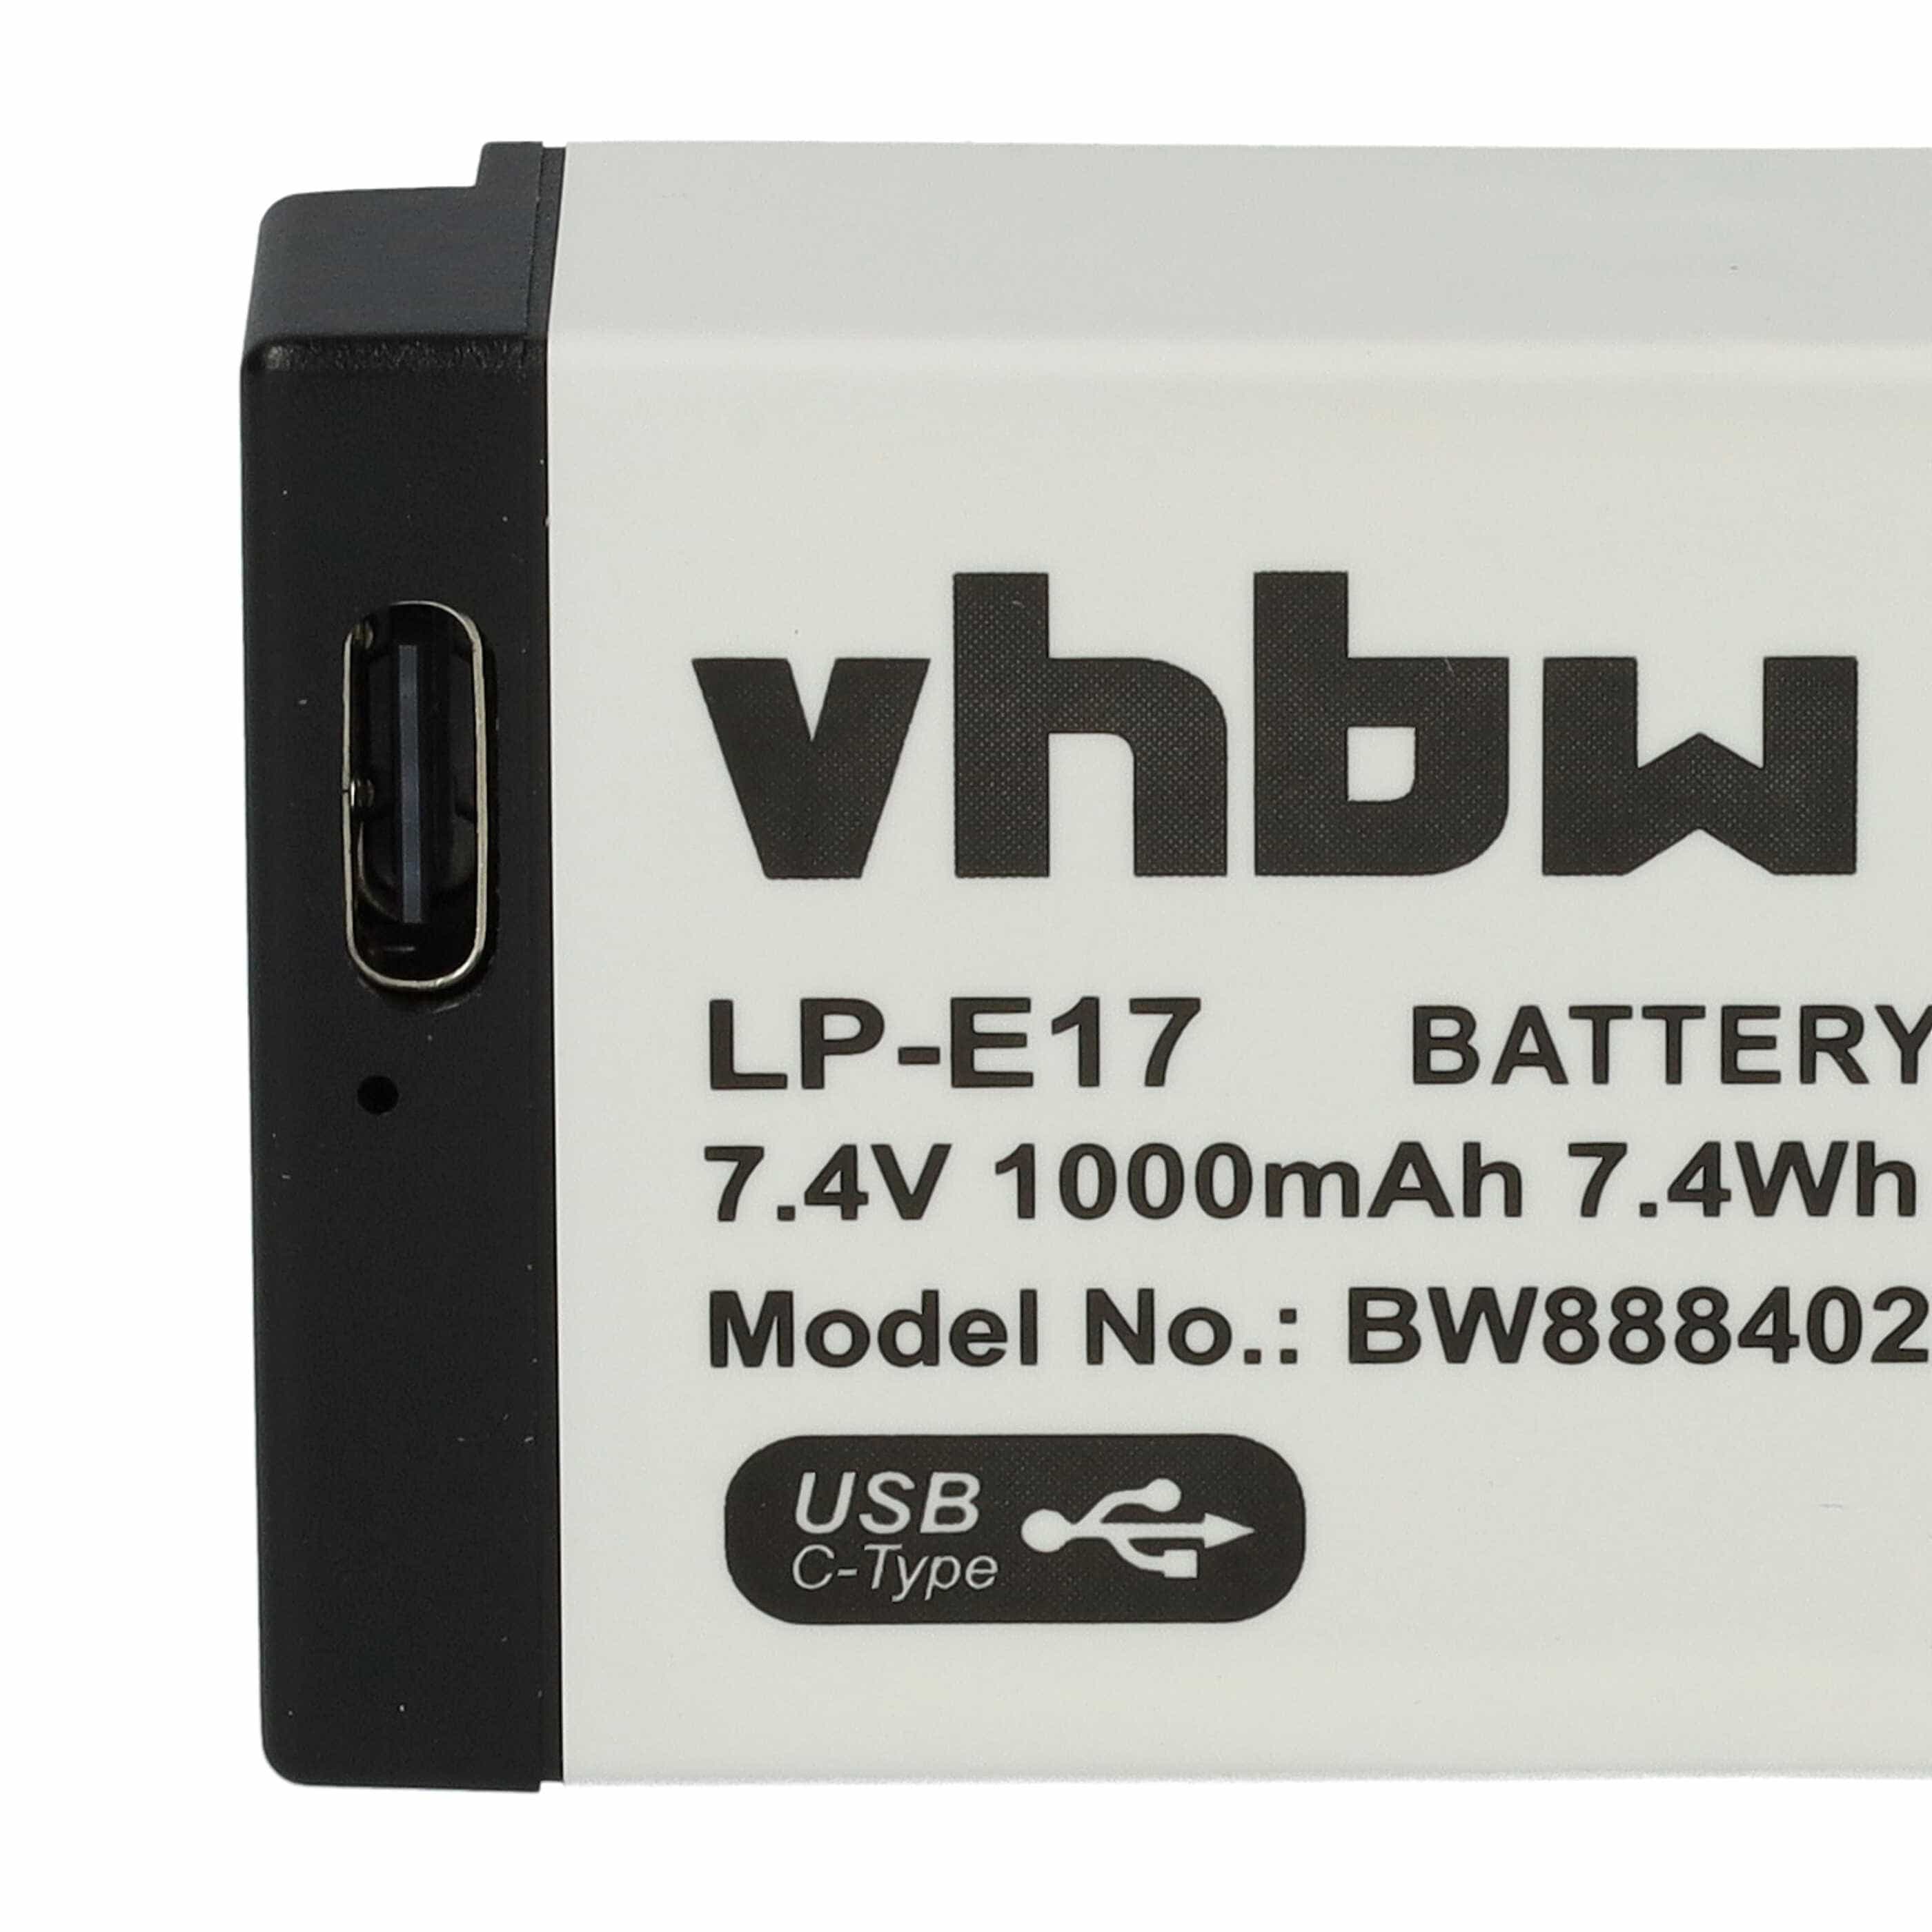 Battery Replacement for Canon LP-E17 - 1000mAh, 7.4V, Li-Ion, with USB C Socket